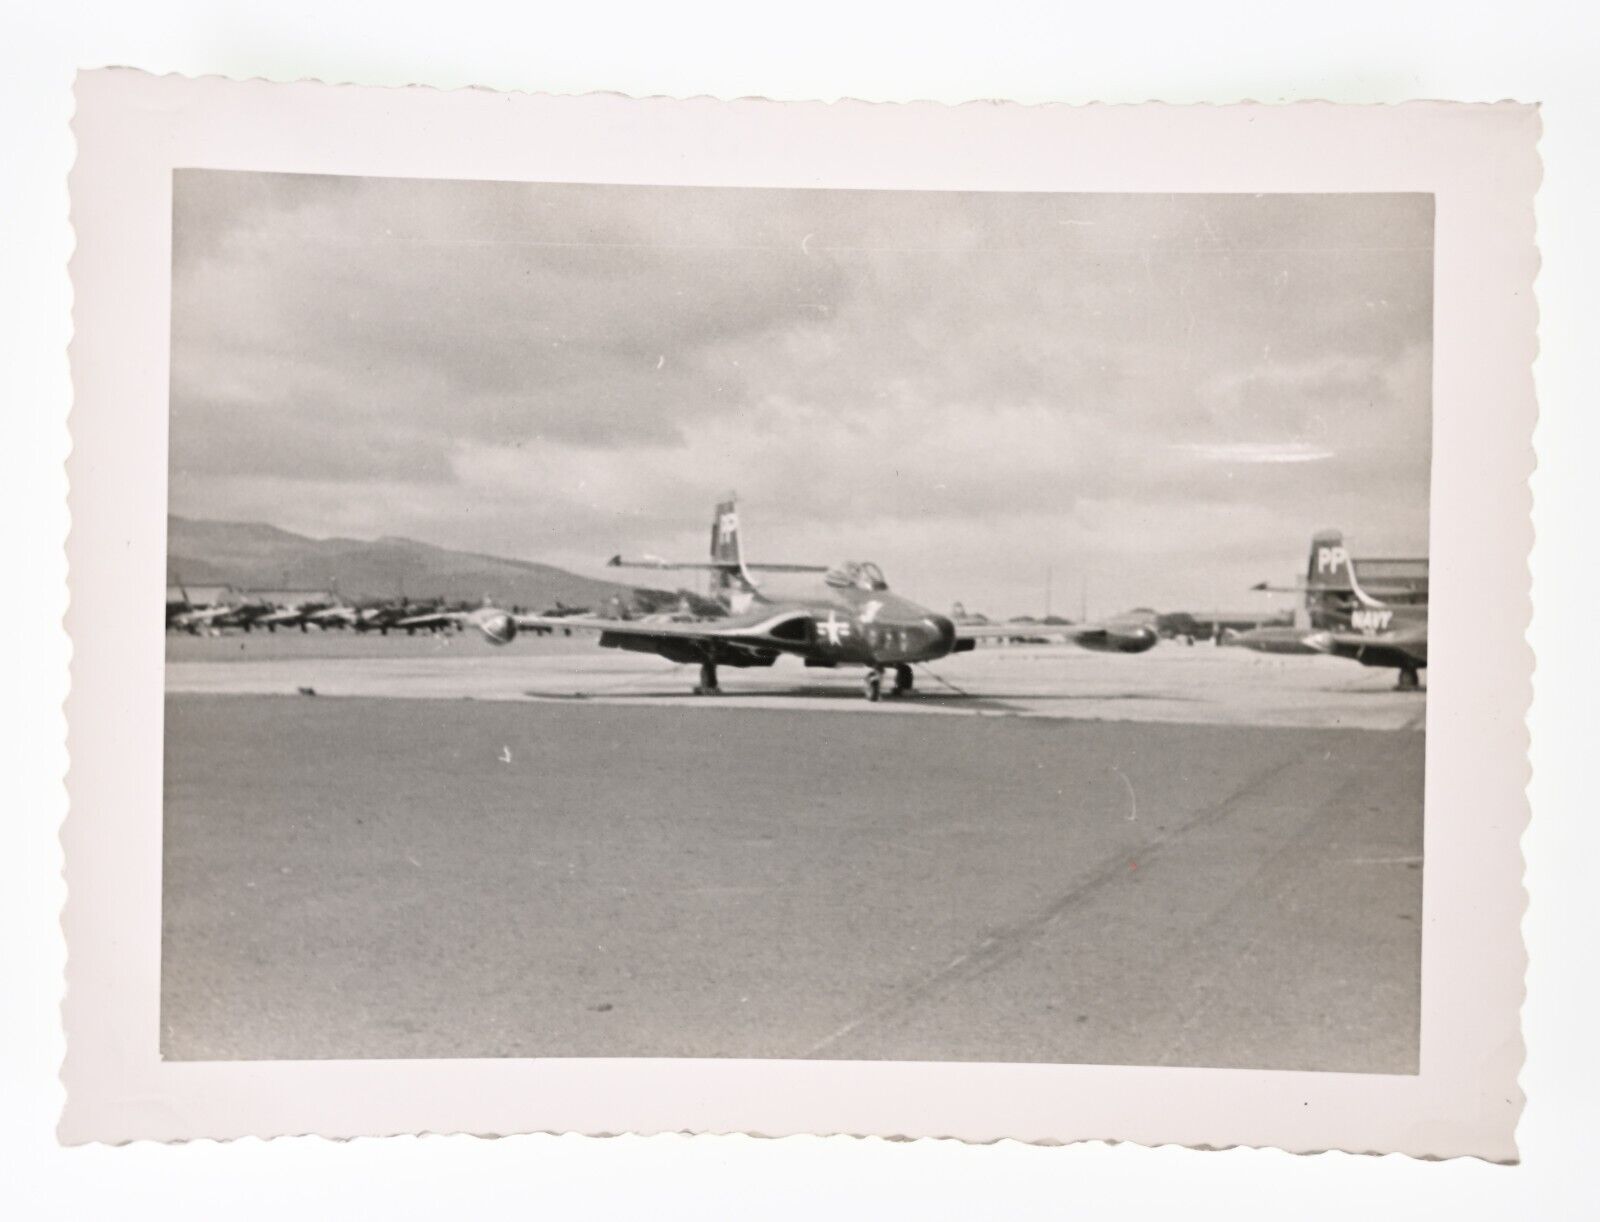 VINTAGE B&W SNAPSHOT CIRCA 1950s MCDONNELL F2H BANSHEE EARLY FIGHTER JET ON BASE